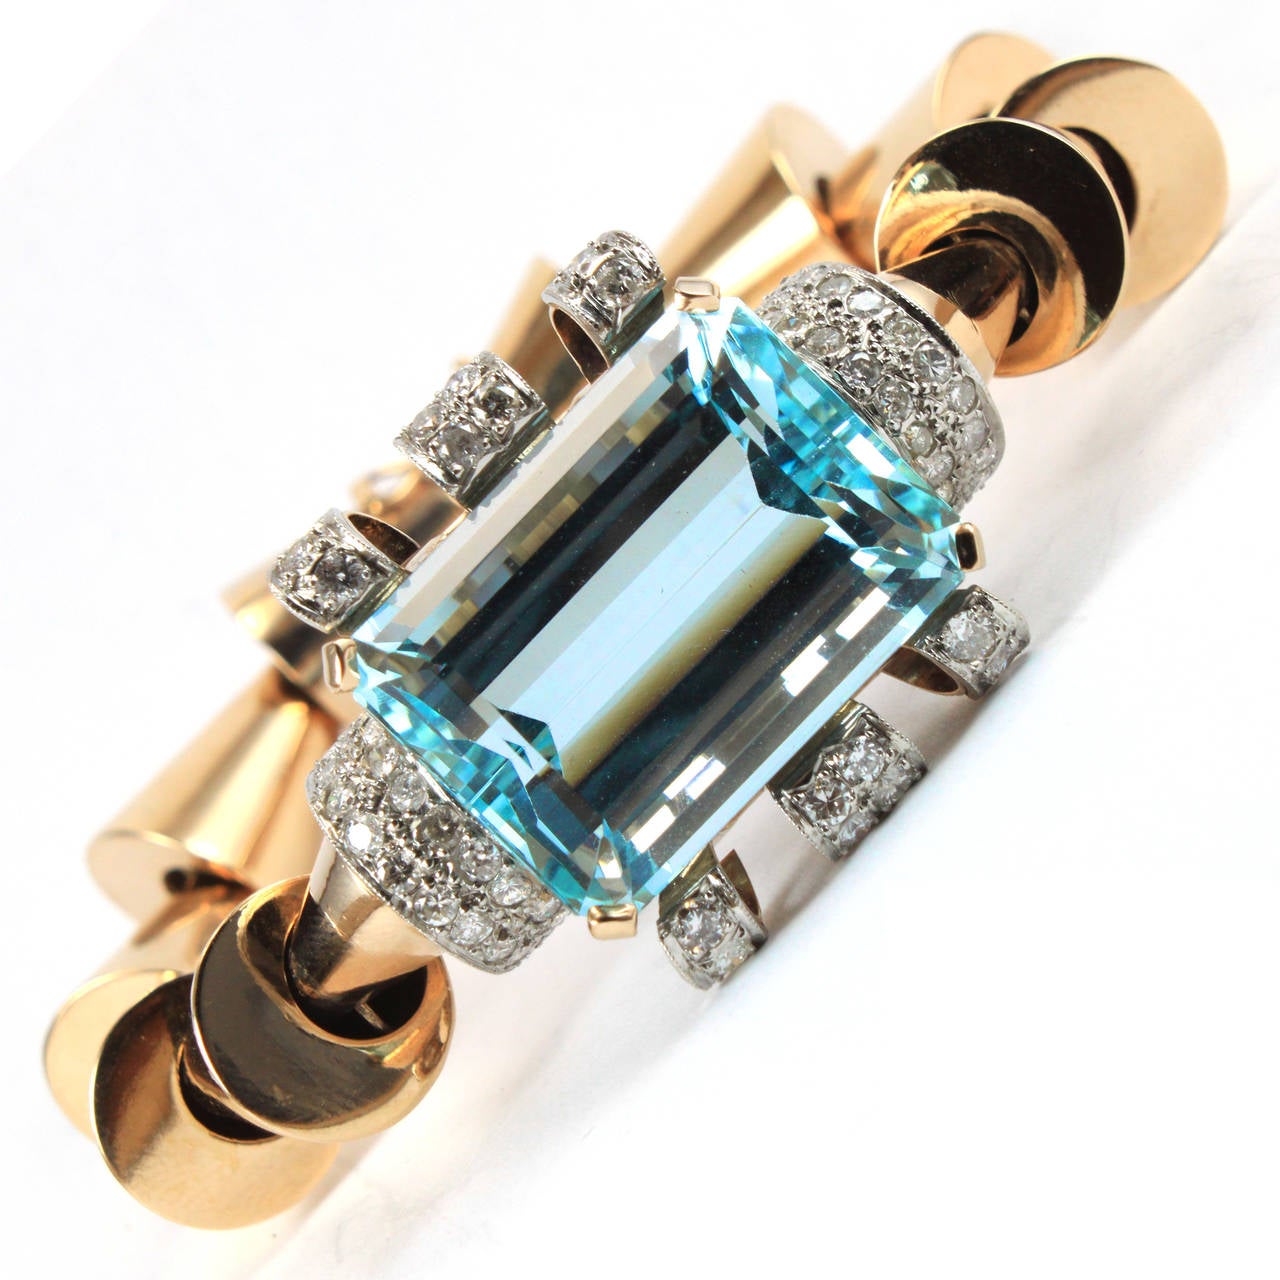 A very chic and unusual 1940s bracelet. It is made out of beautiful 18k gold links showing a classic retro feature of the starting of the machine age. The gold links lead to a beautiful Aquamarine of circa 50 carats, which is surrounded by diamonds